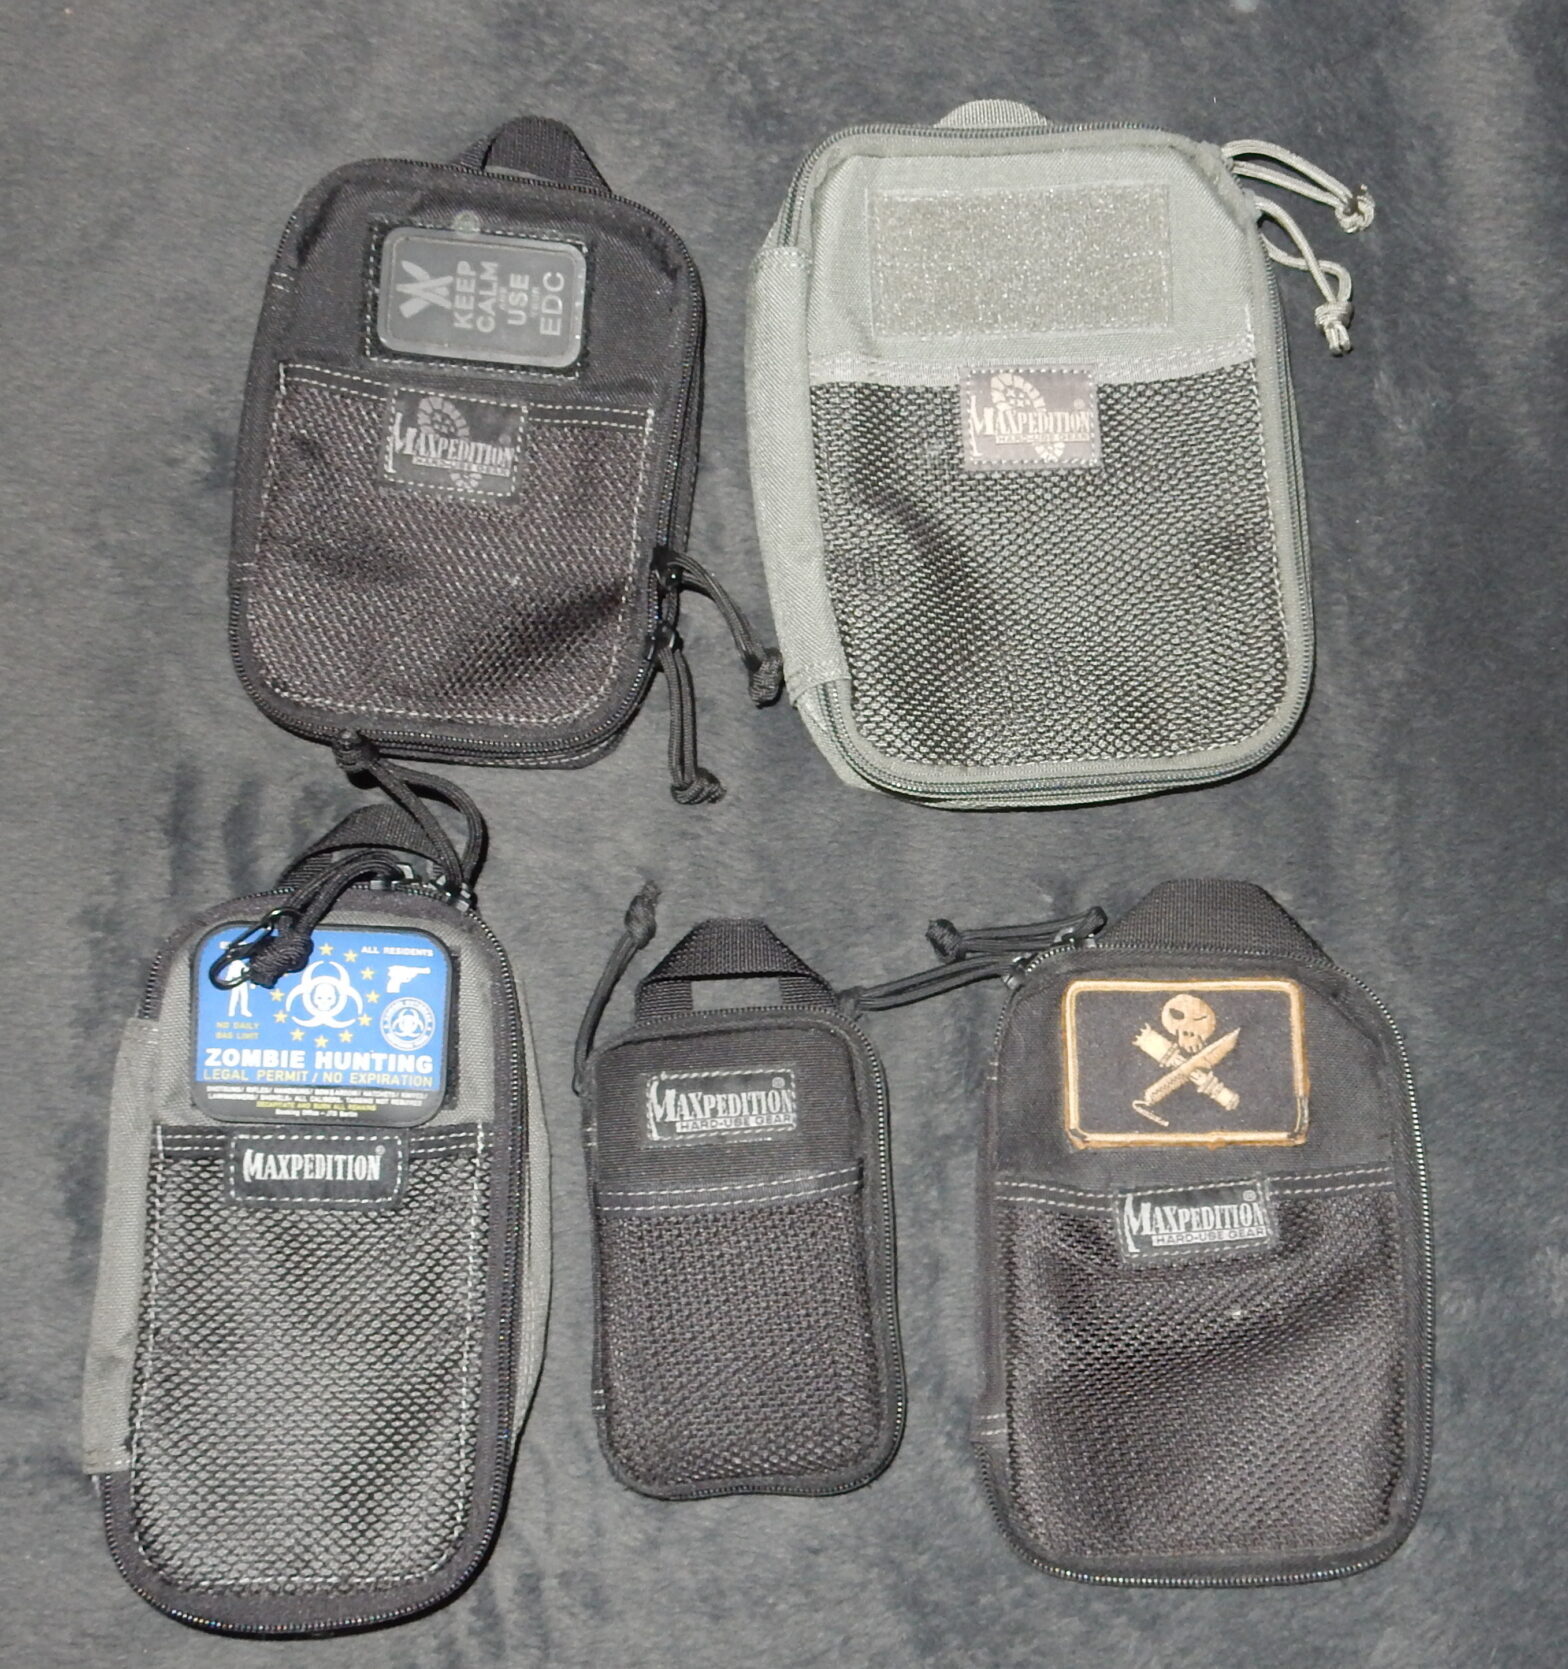 “Which MAXpedition pocket organizer fits?”